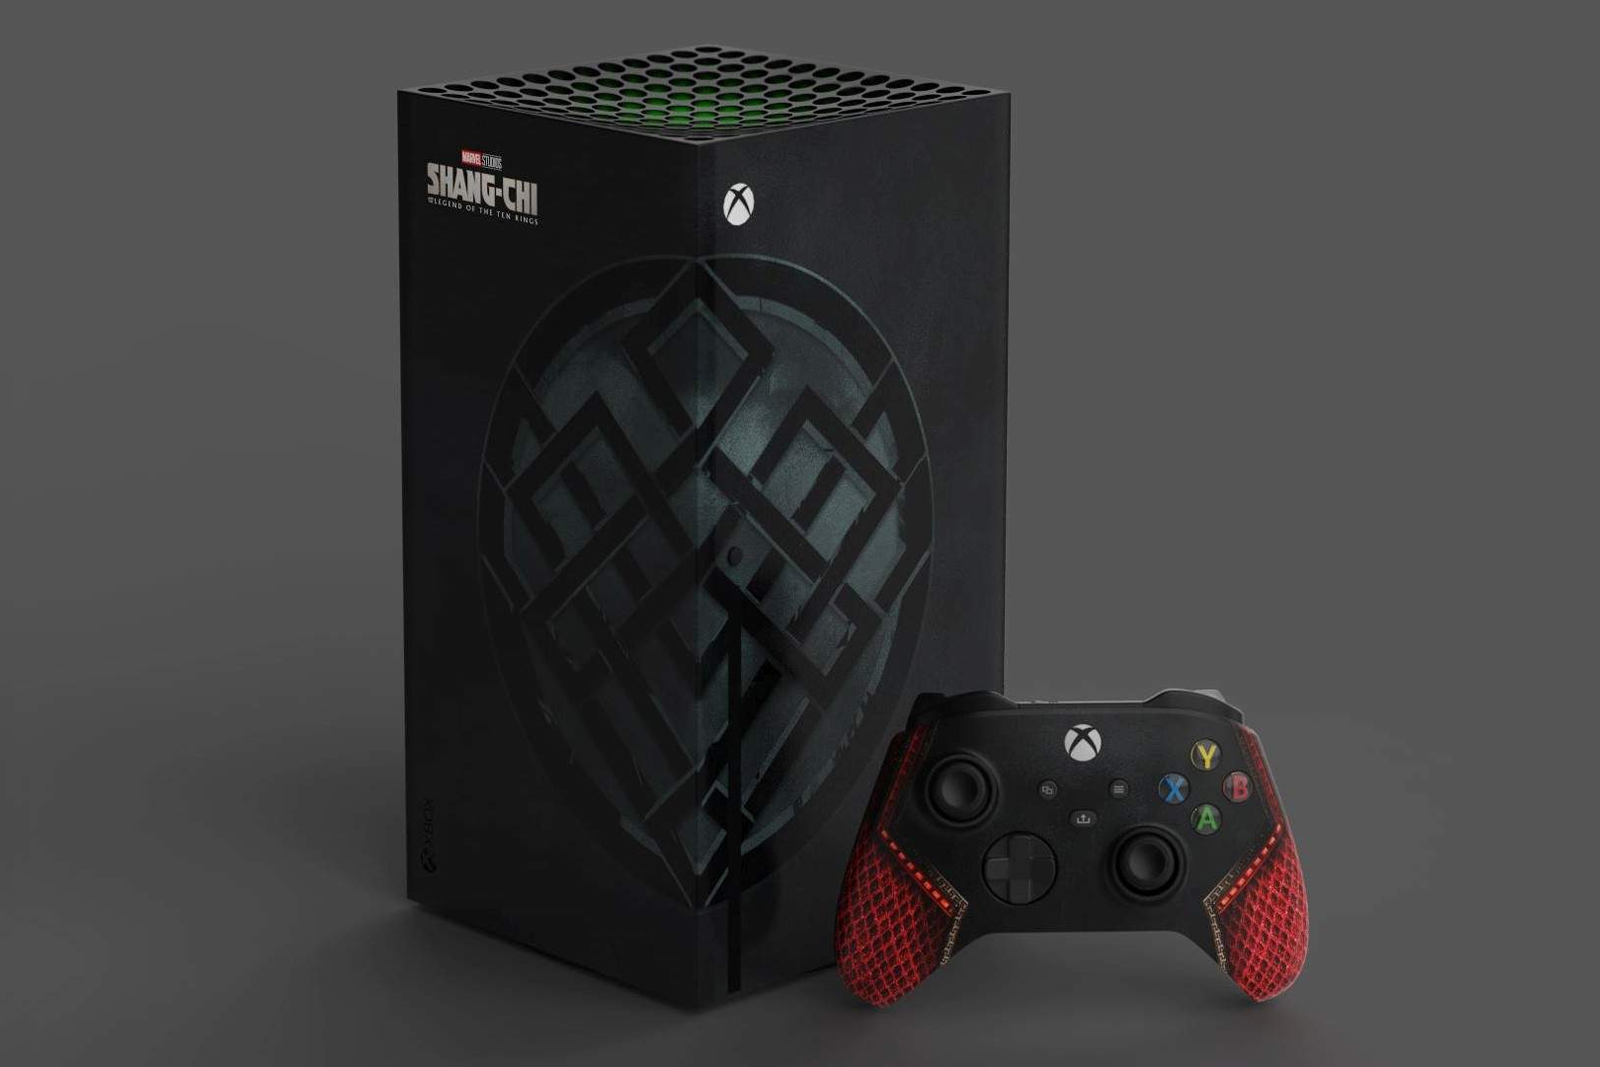 Xbox has a unique, custom Series X bundle to celebrate Marvel's Shang-Chi photo 1